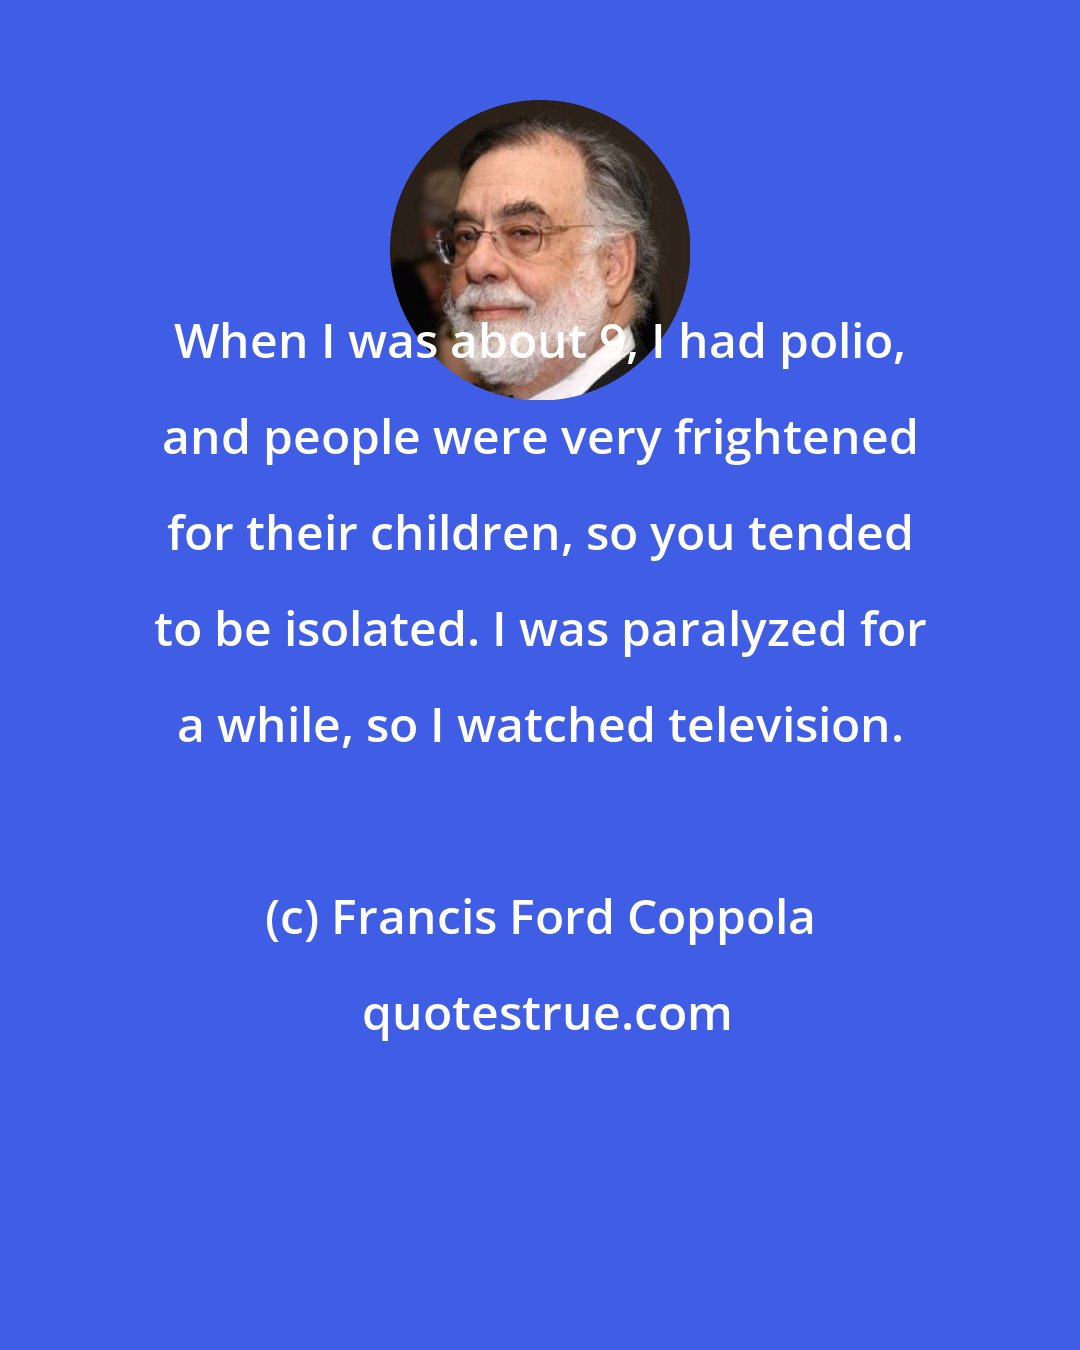 Francis Ford Coppola: When I was about 9, I had polio, and people were very frightened for their children, so you tended to be isolated. I was paralyzed for a while, so I watched television.